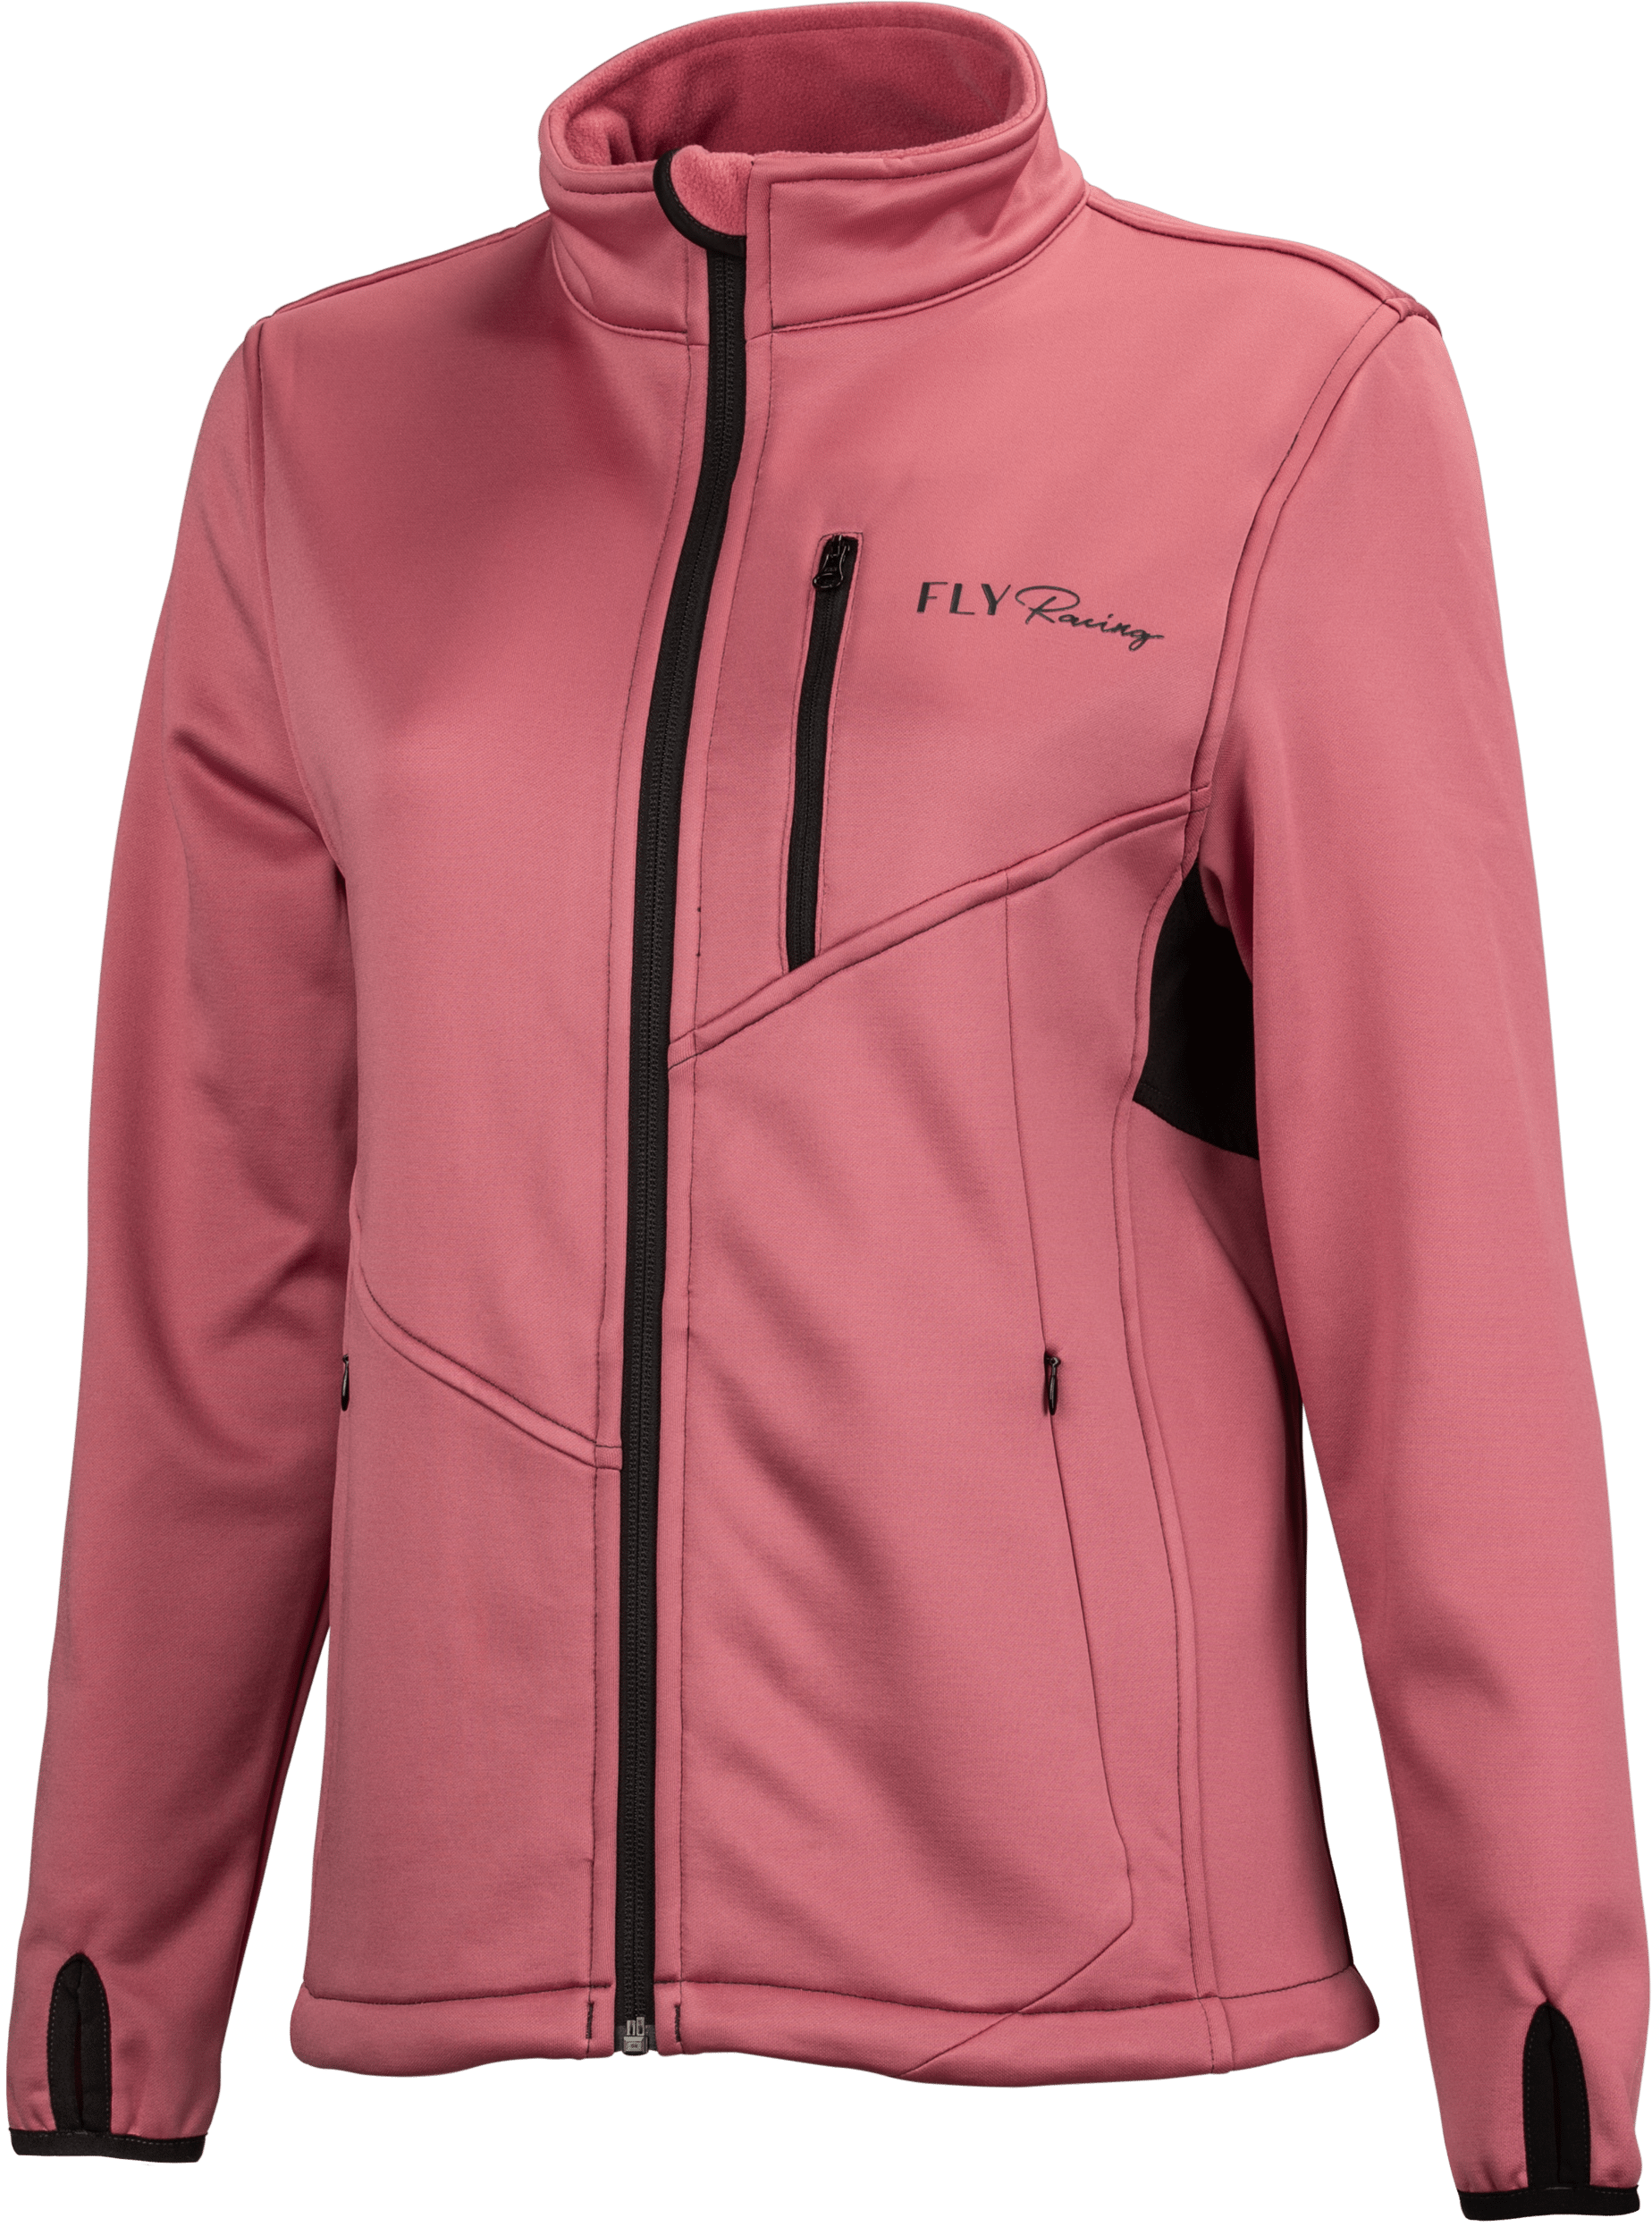 Western Powersports Jacket Pink / 2X Women's Mid Layer Jacket By Fly Racing 354-63422X